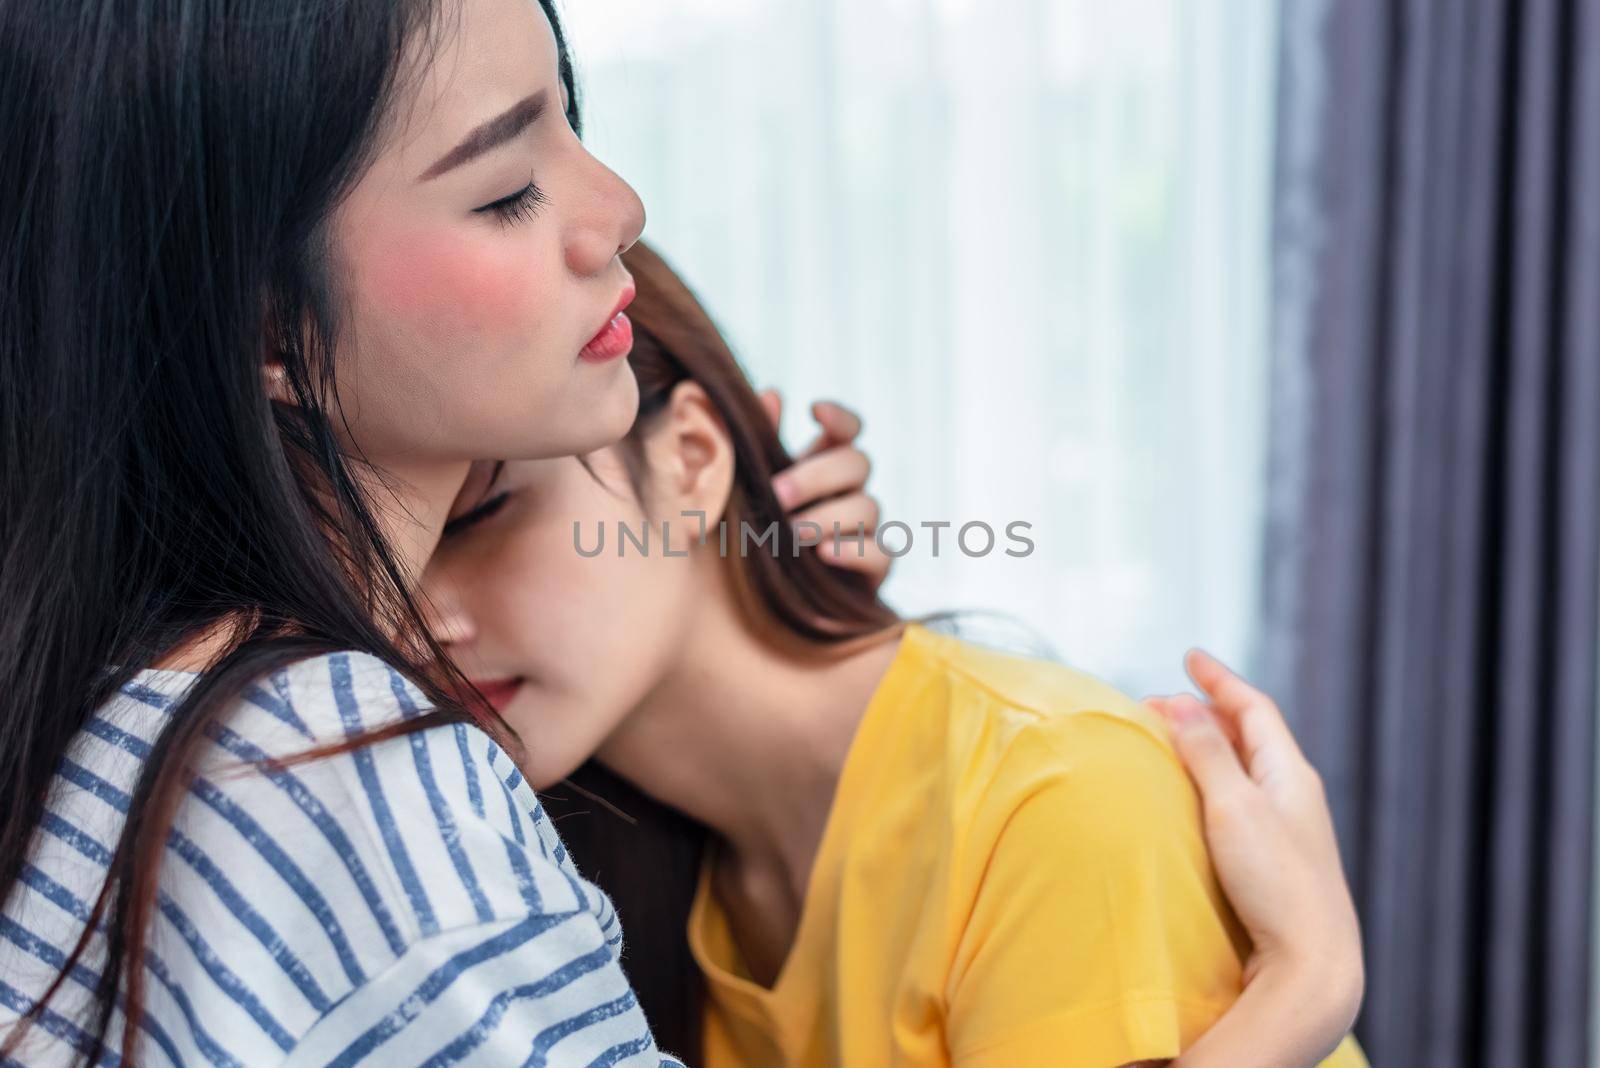 Close up of two Asian Lesbian women embracing together in bedroom. Couple people and Beauty concept. Happy lifestyles and home sweet home theme. Embracing of homosexual. Love scene making of female